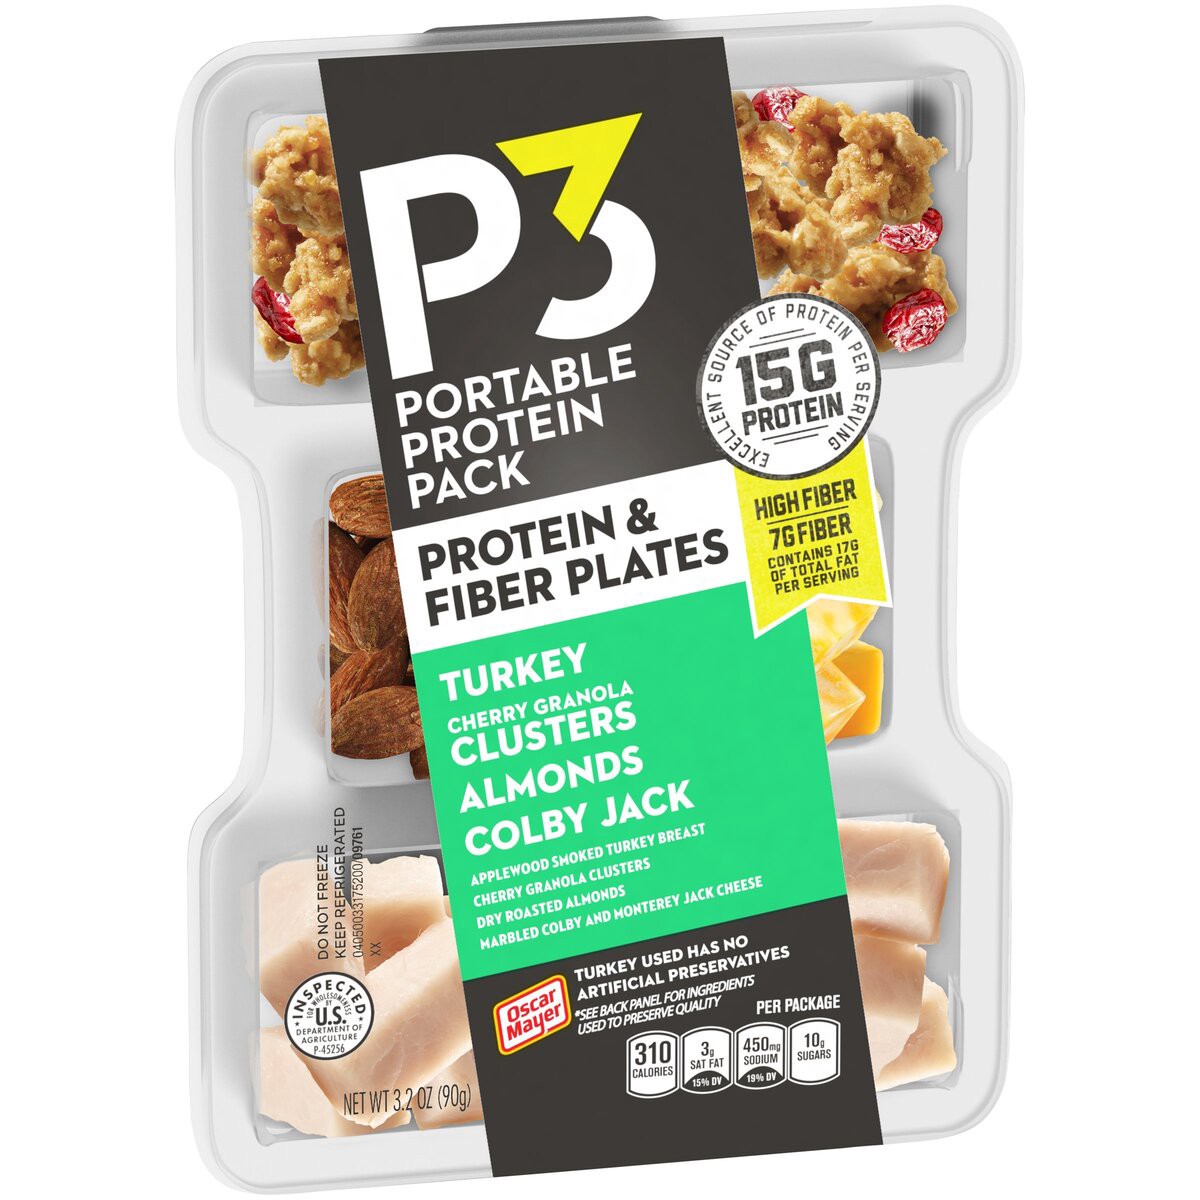 slide 2 of 8, P3 Portable Protein Snack Pack & Fiber Plate with Turkey, Cherry Granola Clusters, Almonds & Colby Jack Cheese Tray, 3.2 oz